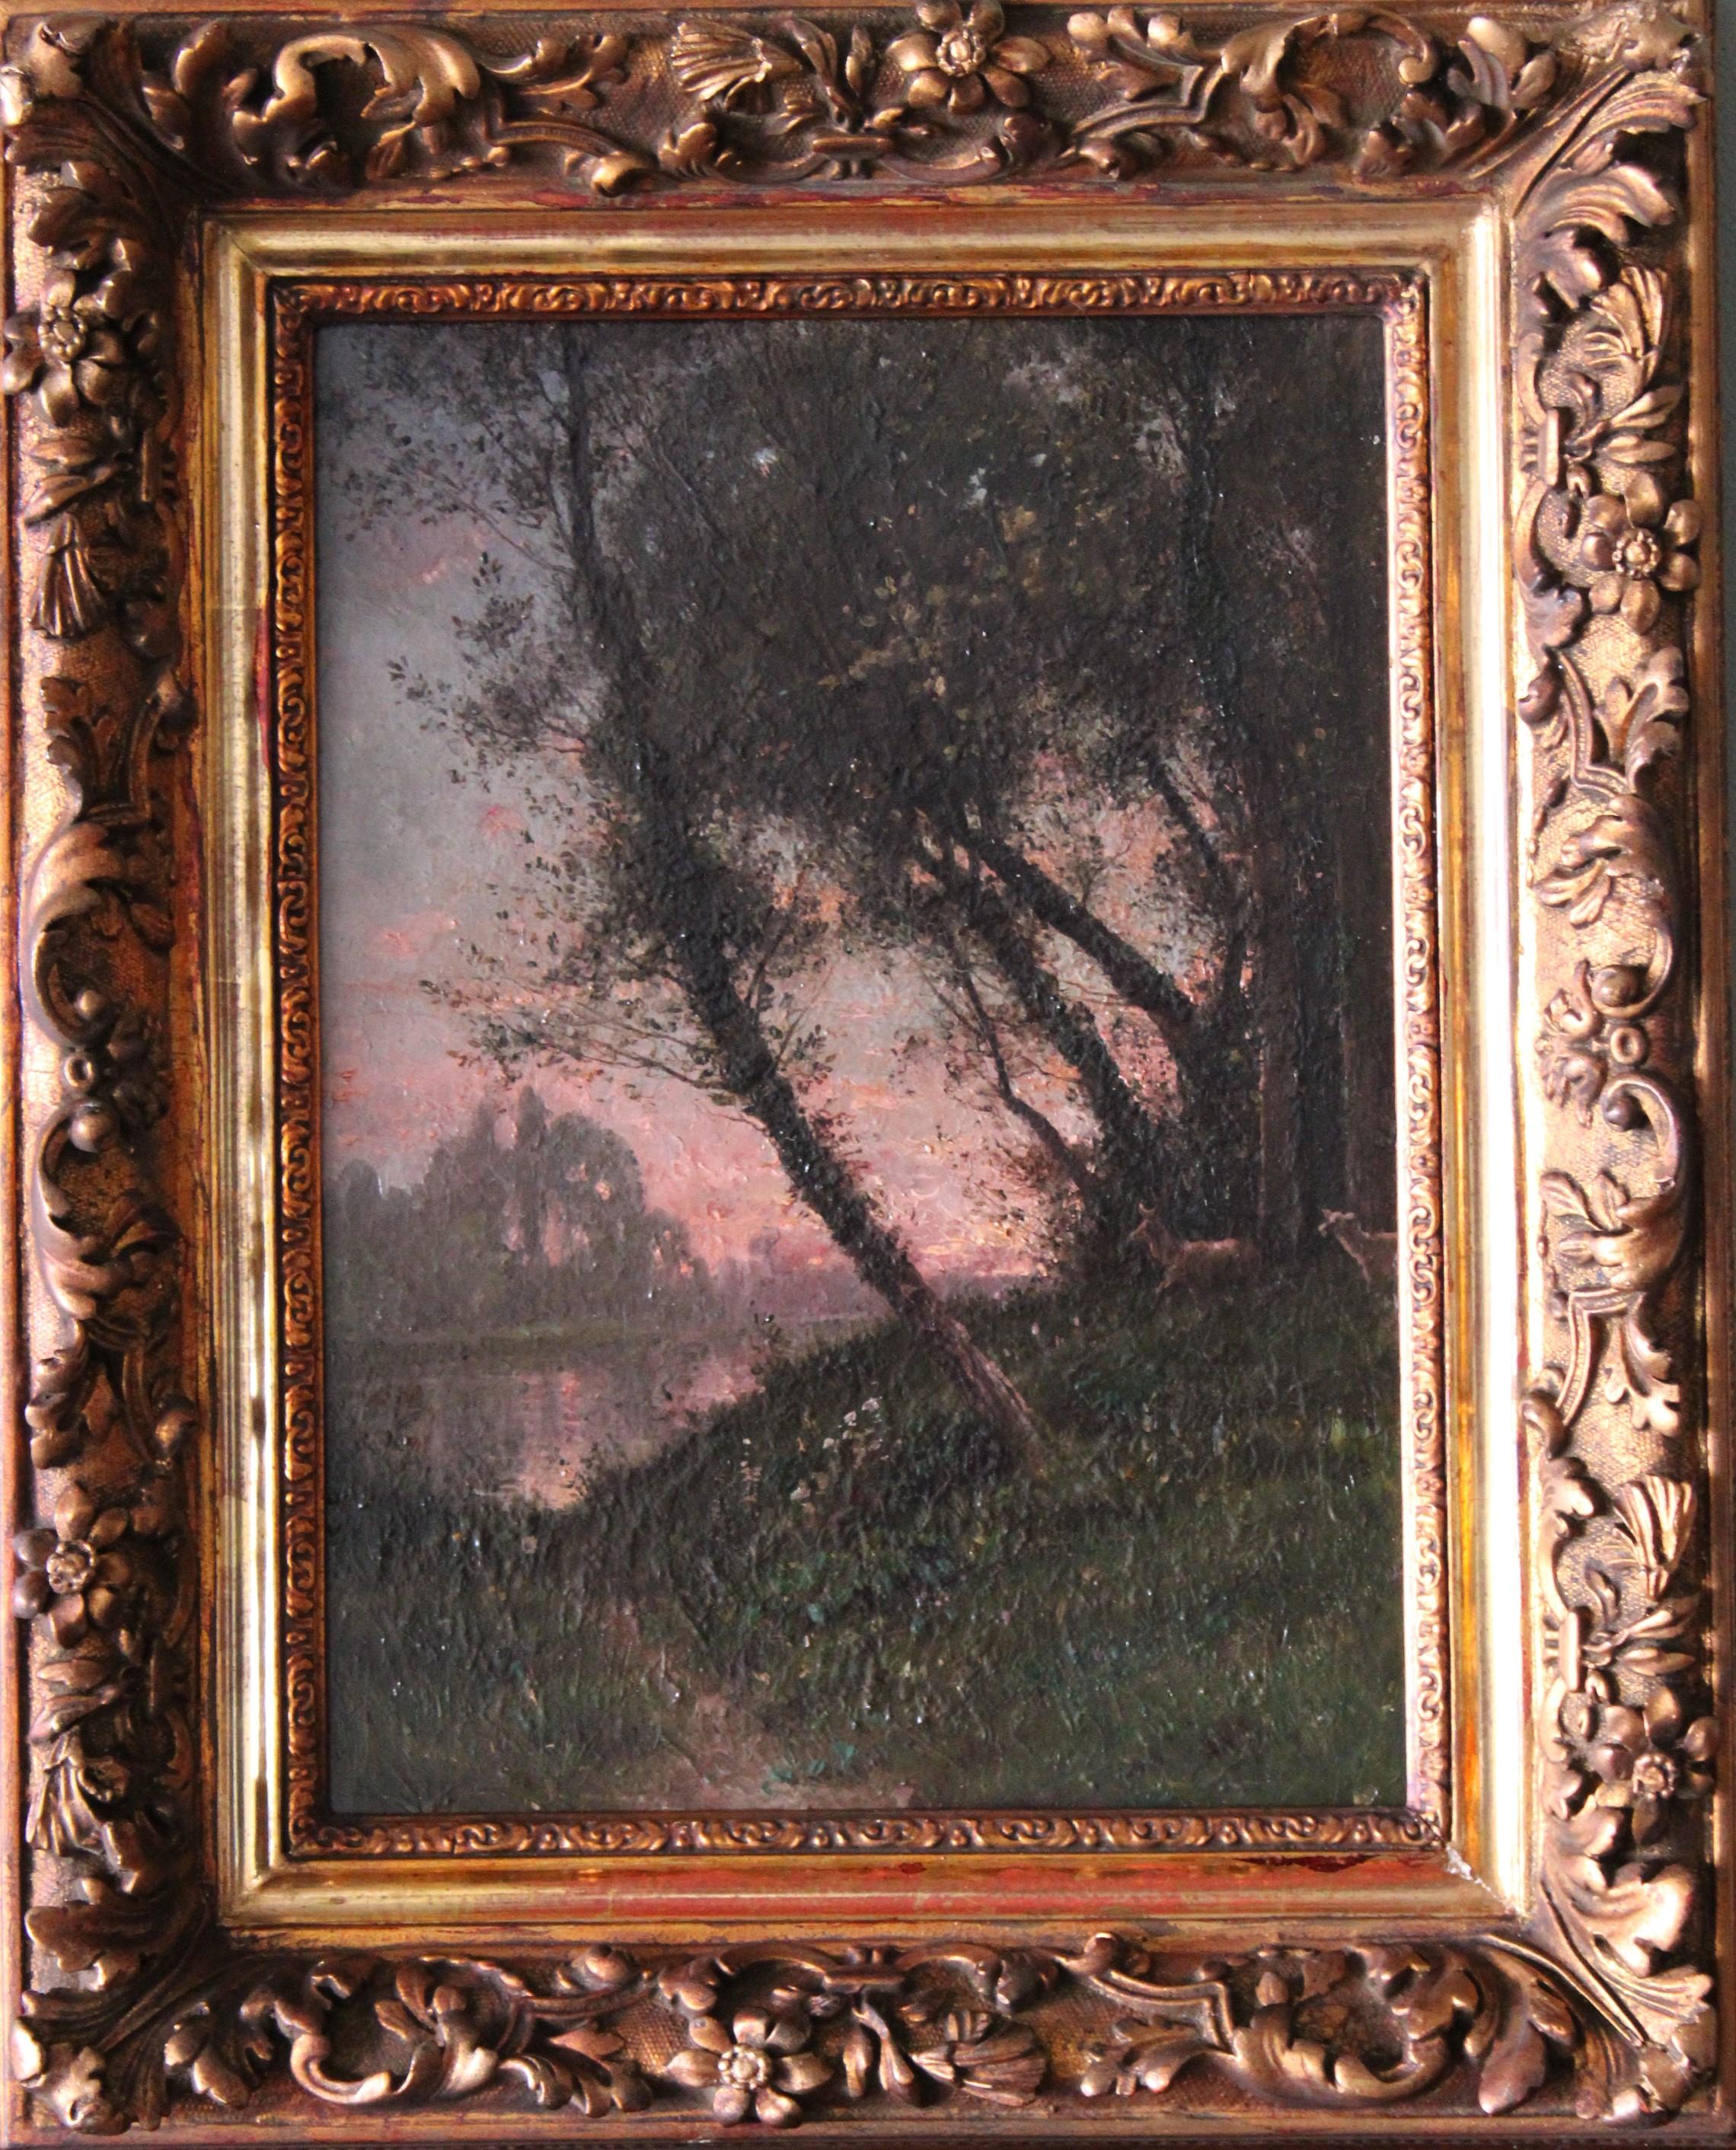 This gorgeous old dark and moody French oil painting from the mid 1800's is signed in the lower left corner and is in its original old frame.  Antique French sunset landscape/riverside oil painting by French artist Abel Orry on thick wood board